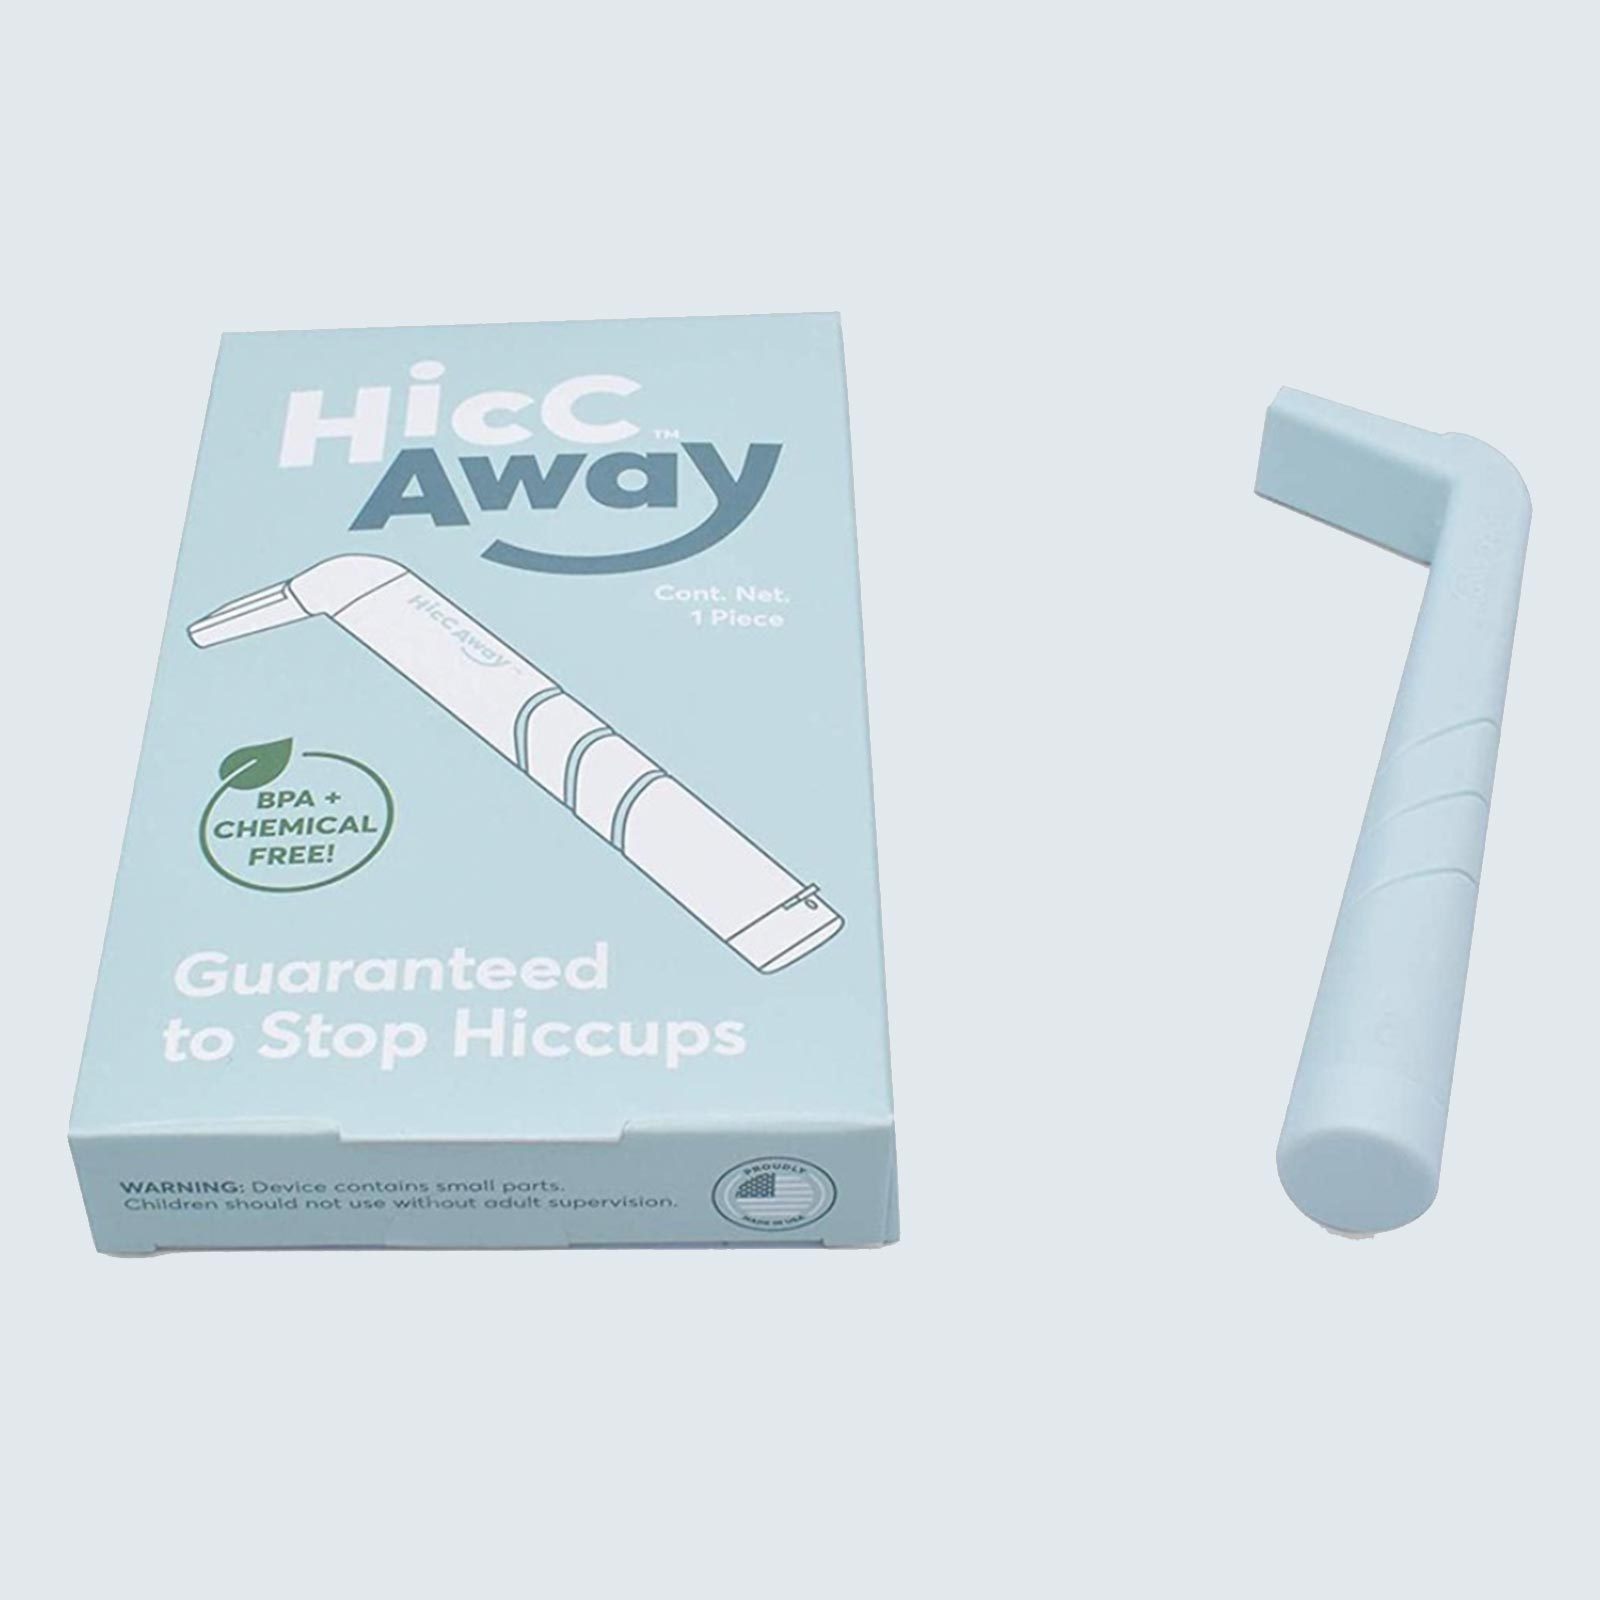 HiccAway Hiccup Curing Device